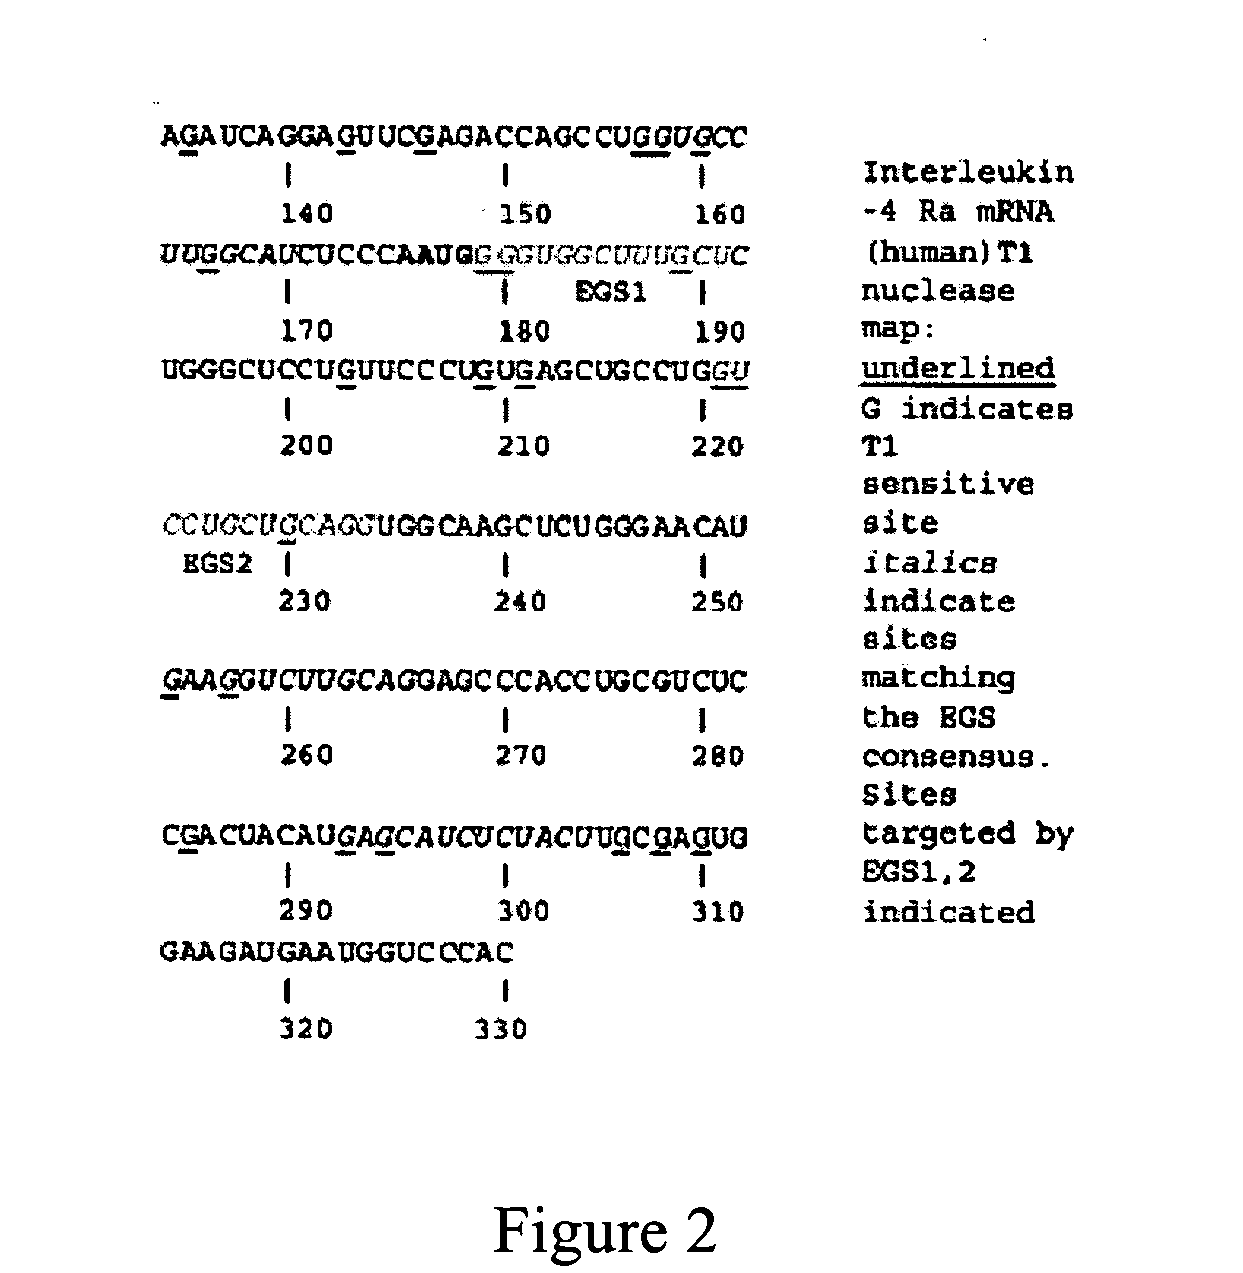 Nuclease resistant external guide sequences for treating inflammatory and viral related respiratory diseases